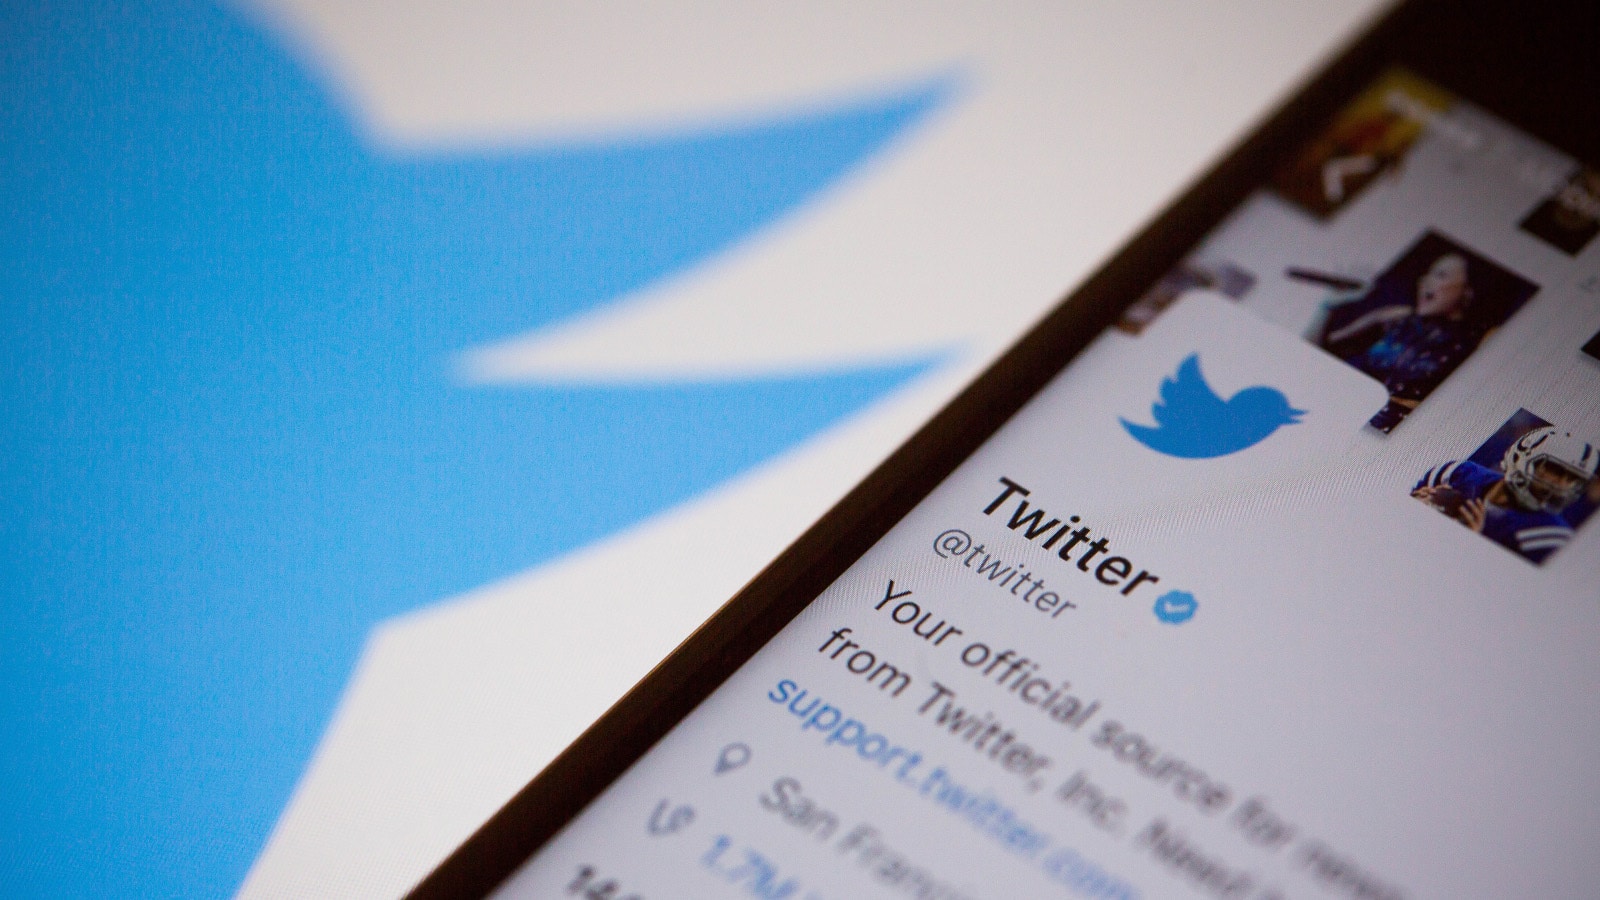 Twitter bans sharing of photos without consent